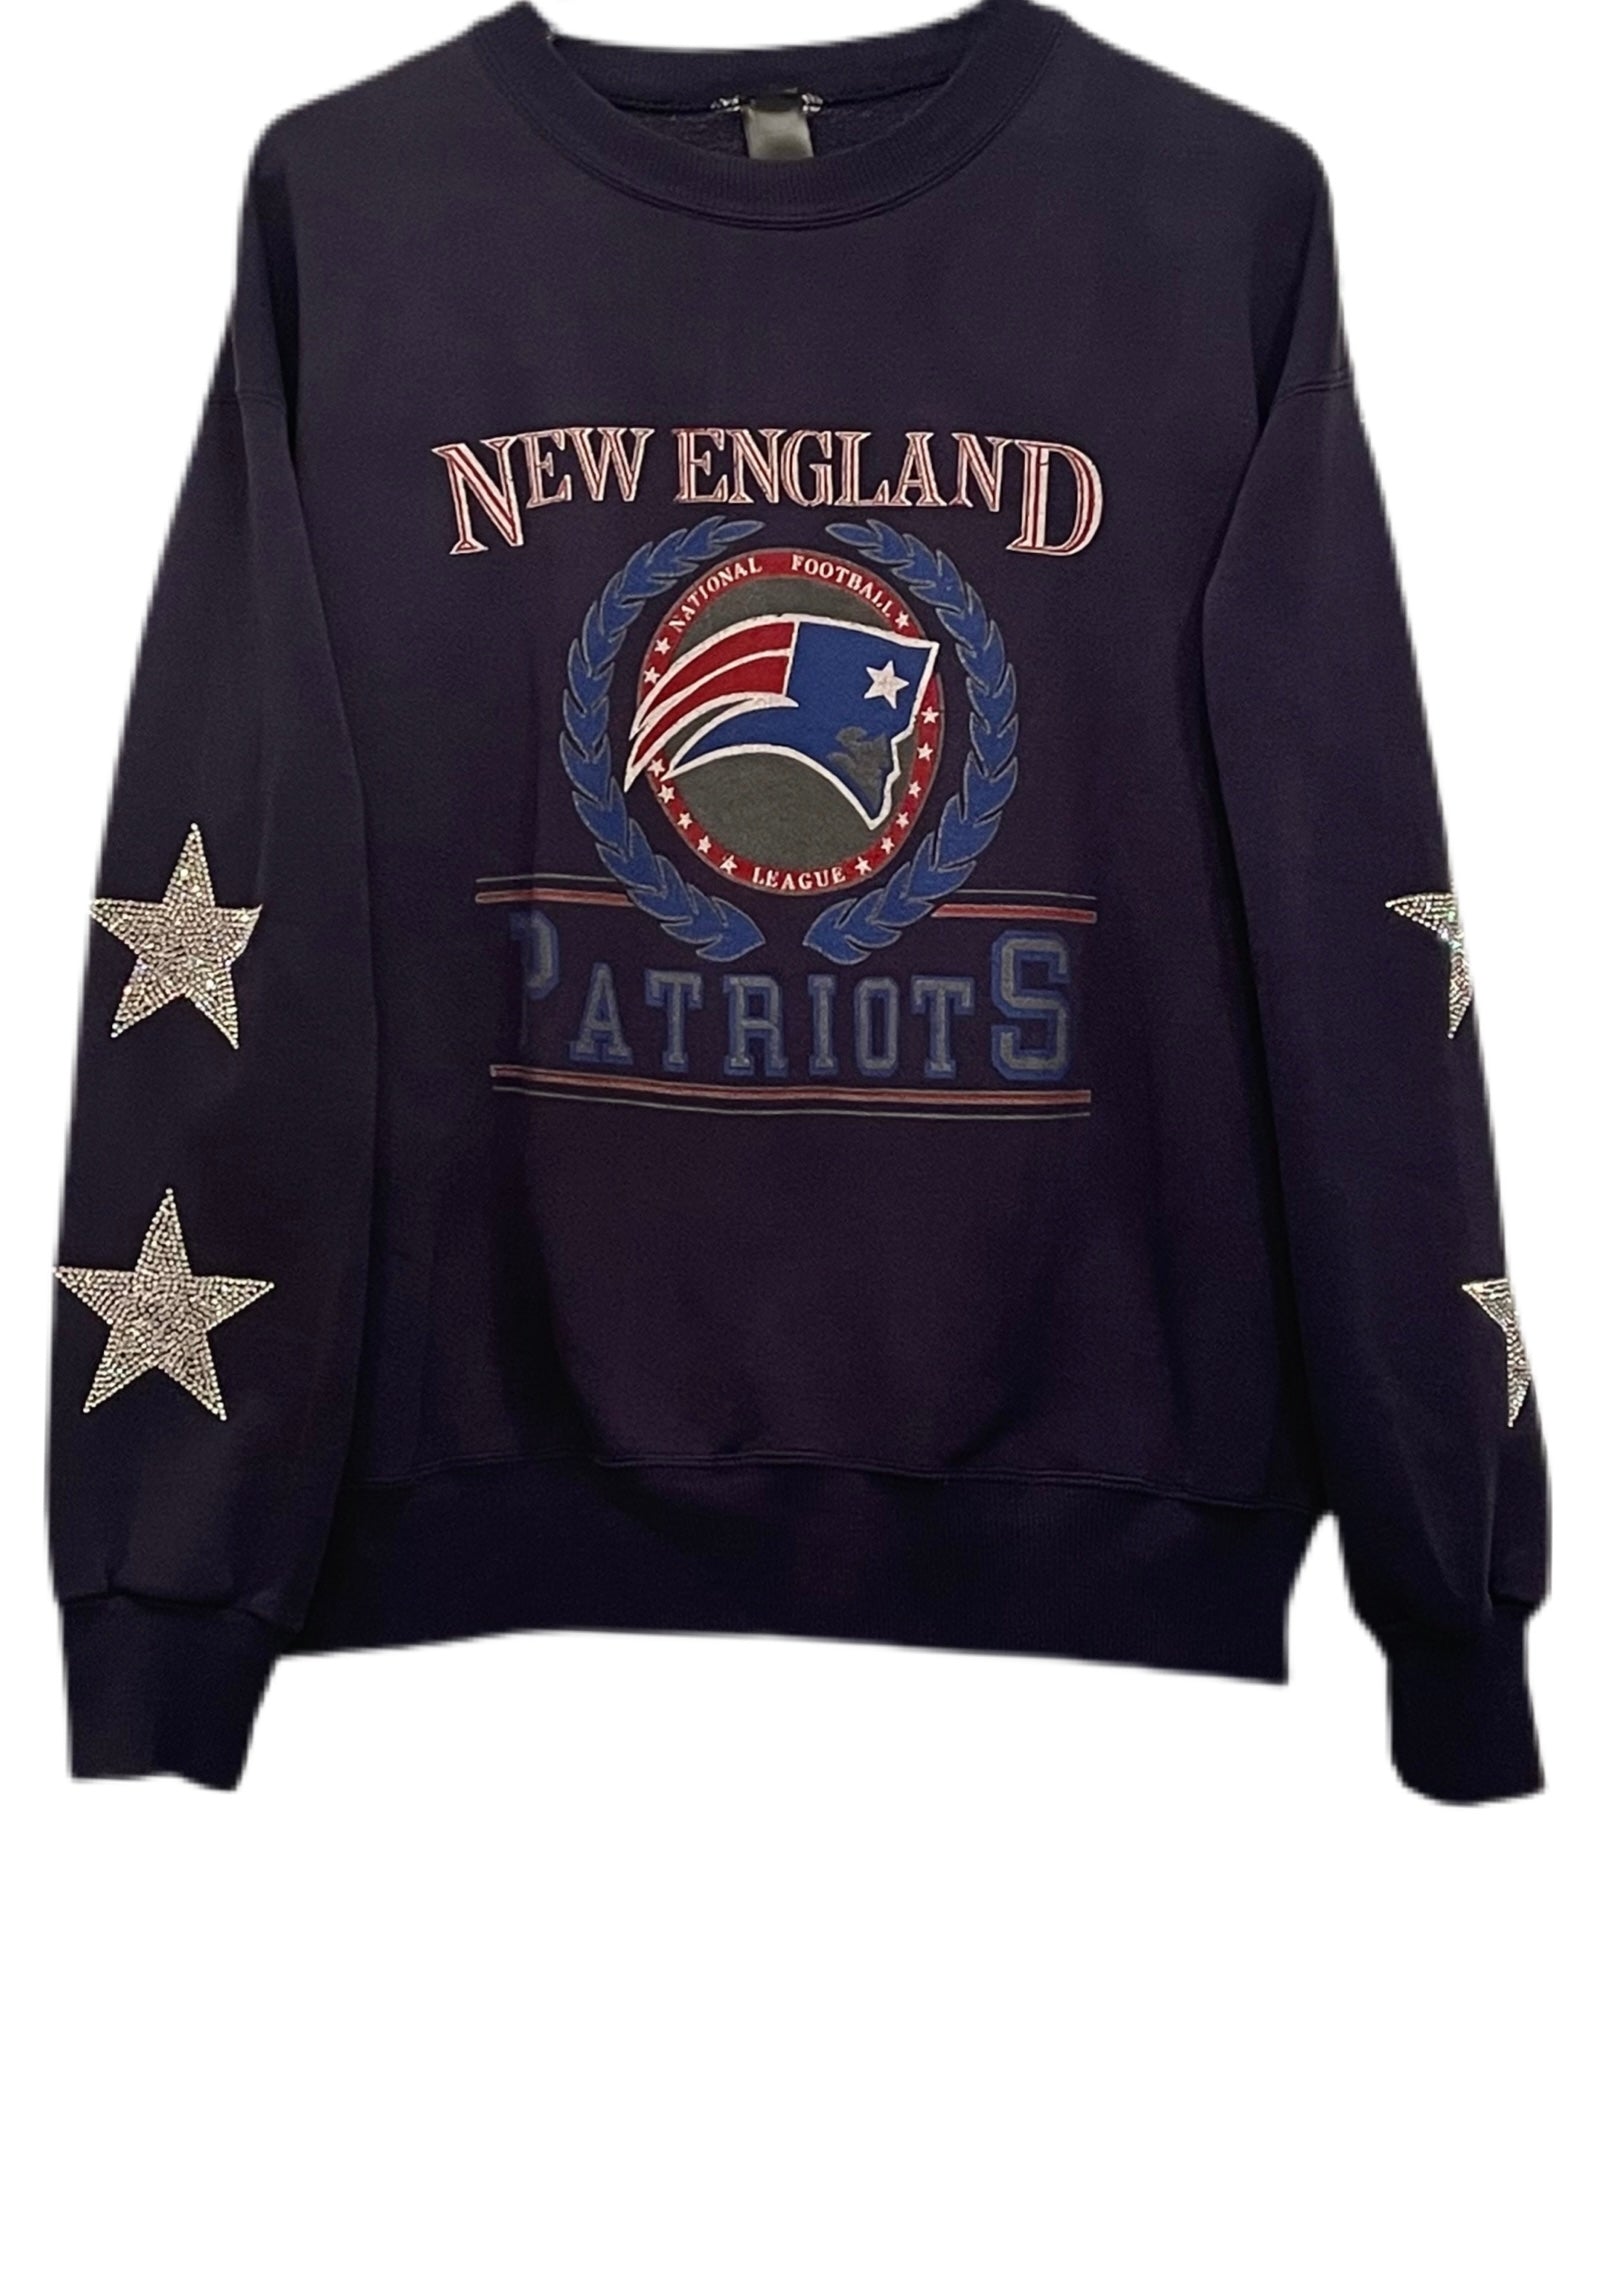 New England Patriots, NFL One of a KIND Vintage Sweatshirt with